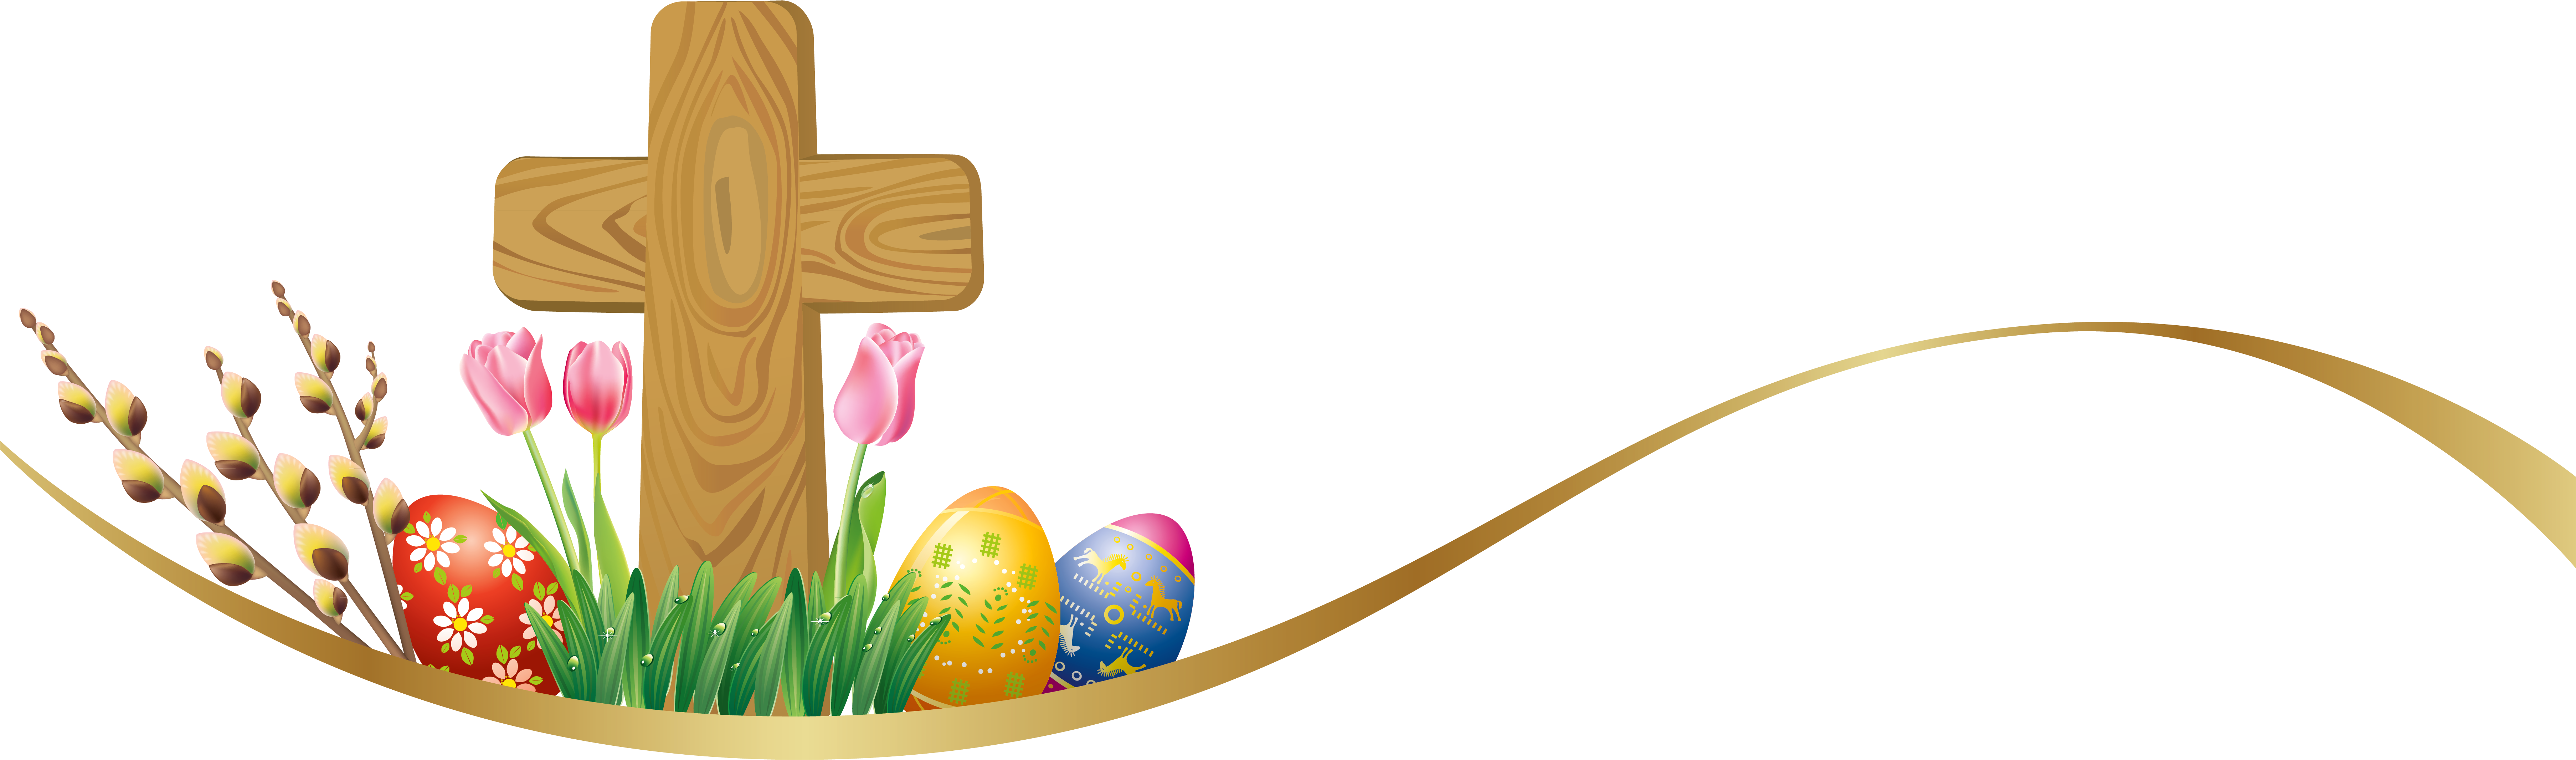 Easter Cross Clipart - Easter Eggs And Cross (7226x2279)